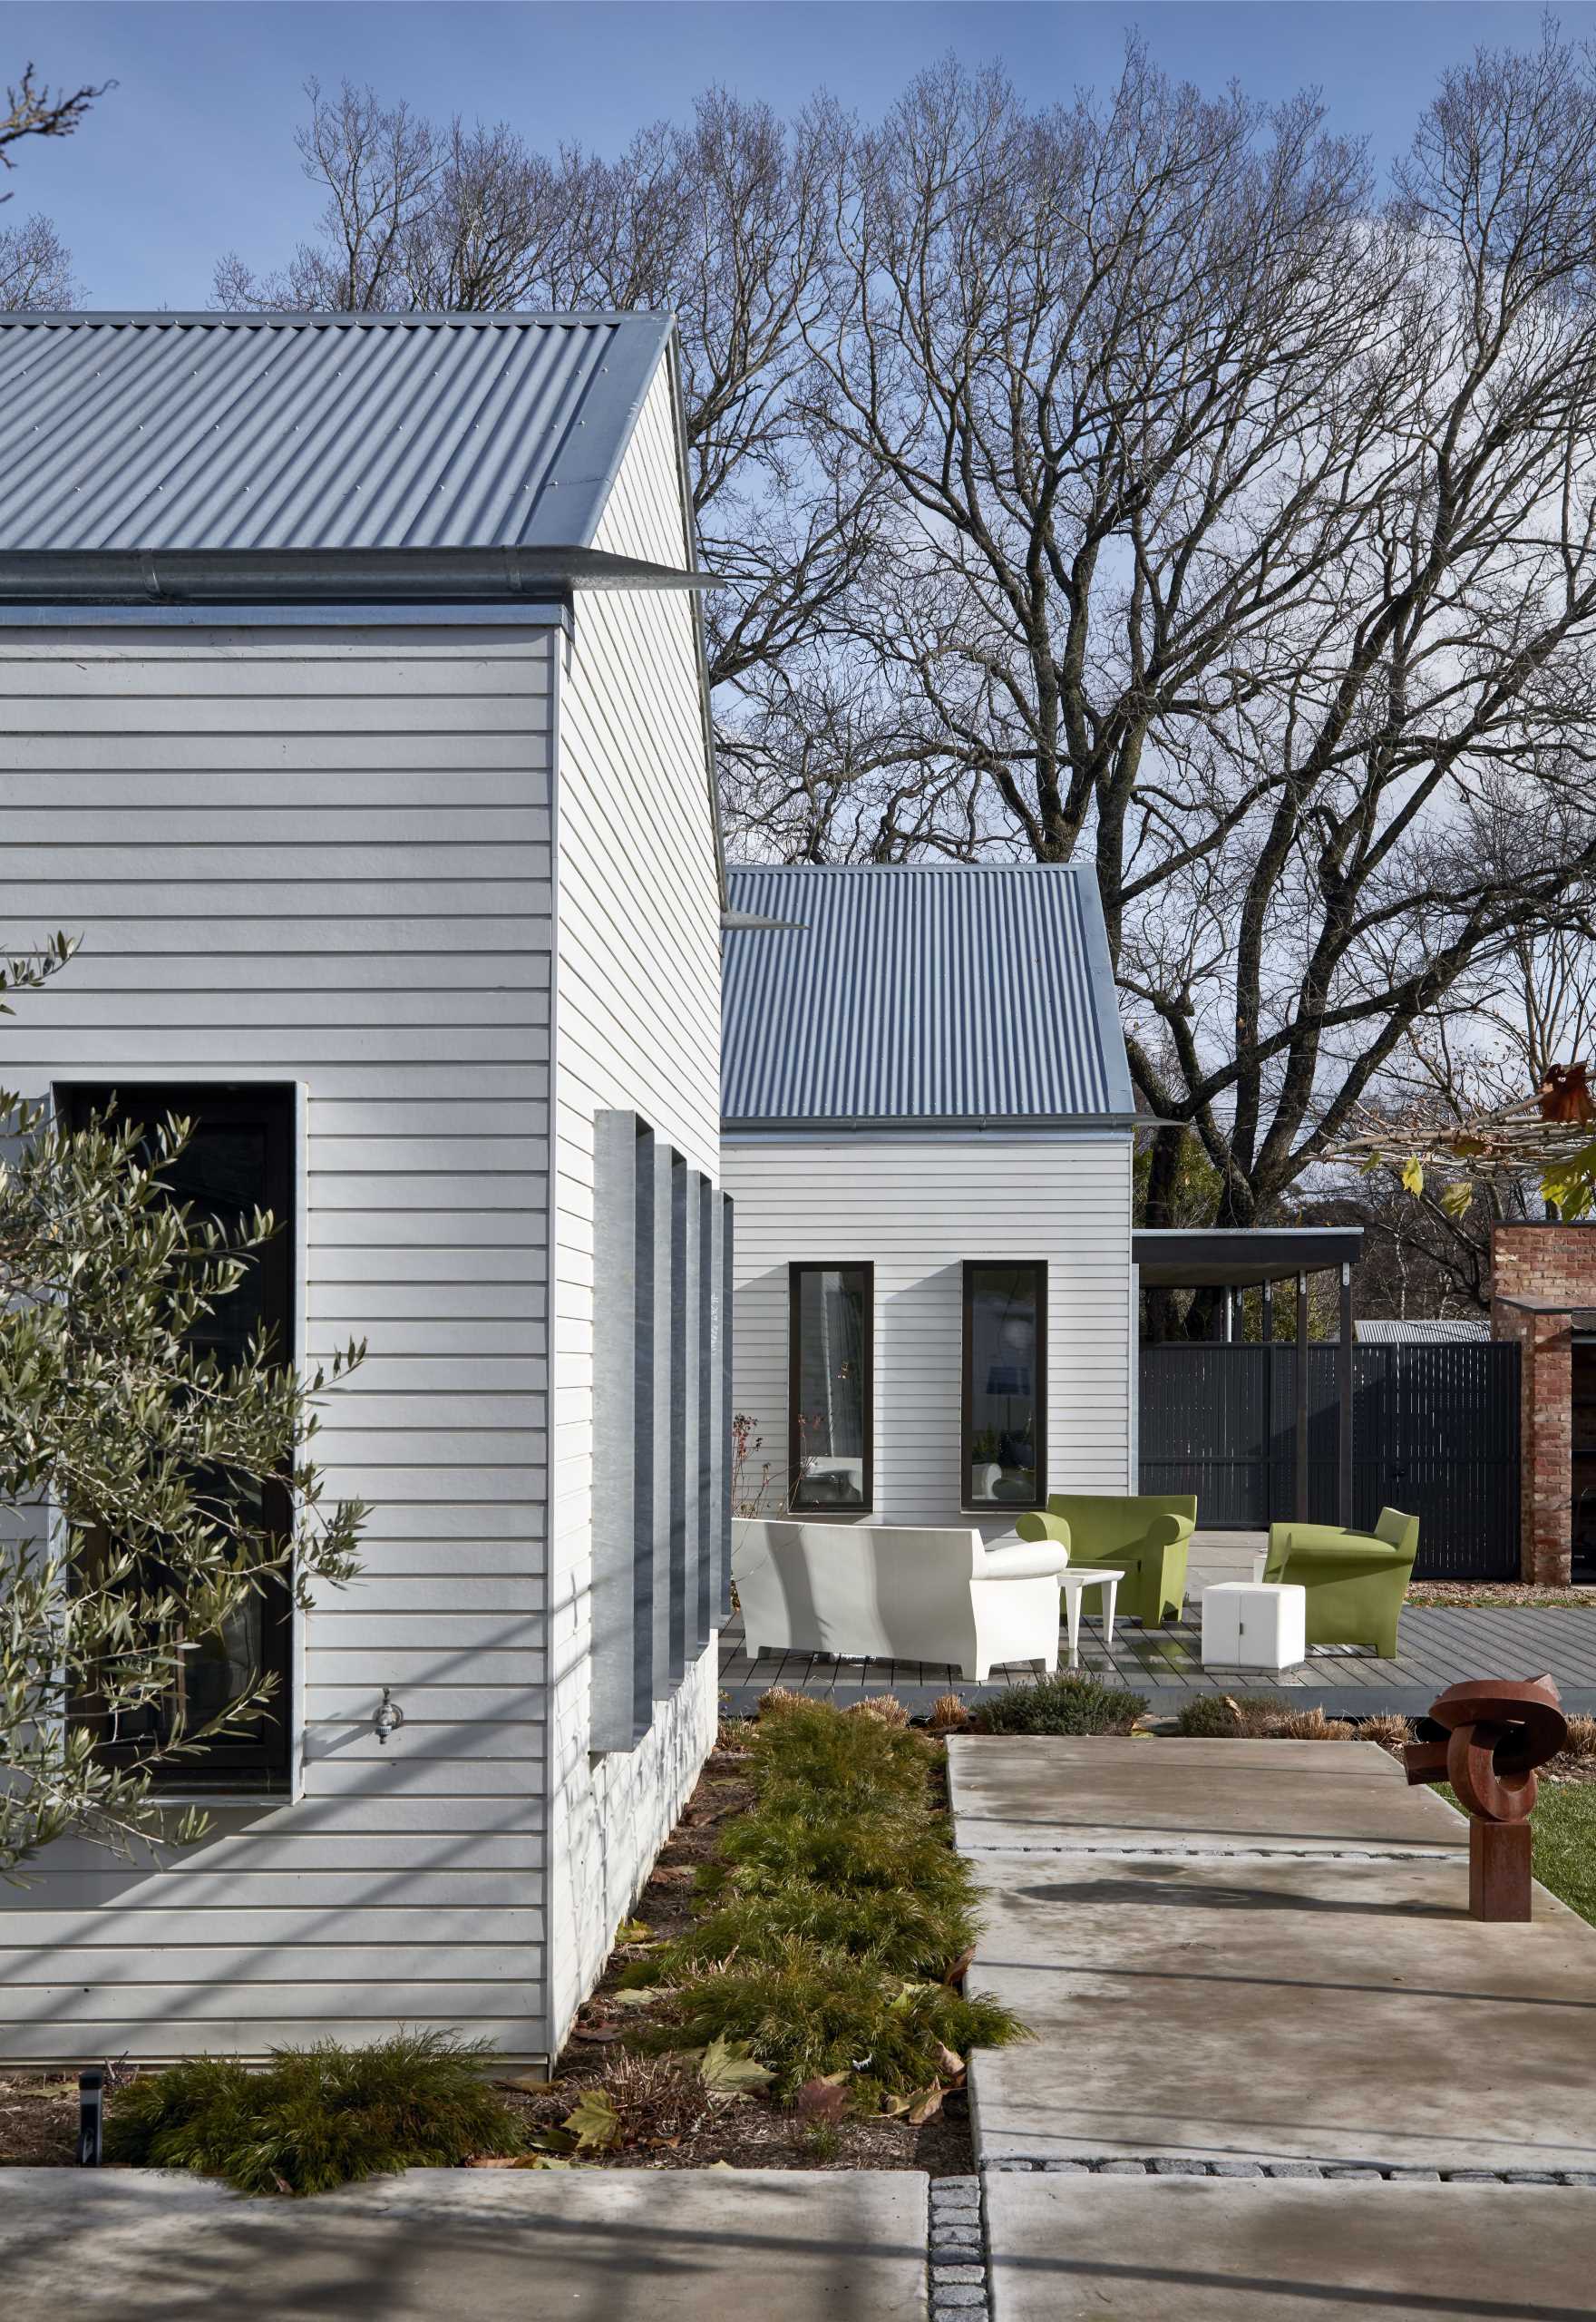 The home is a contemporary, stripped-back take on a classic double-fronted weatherboard house.